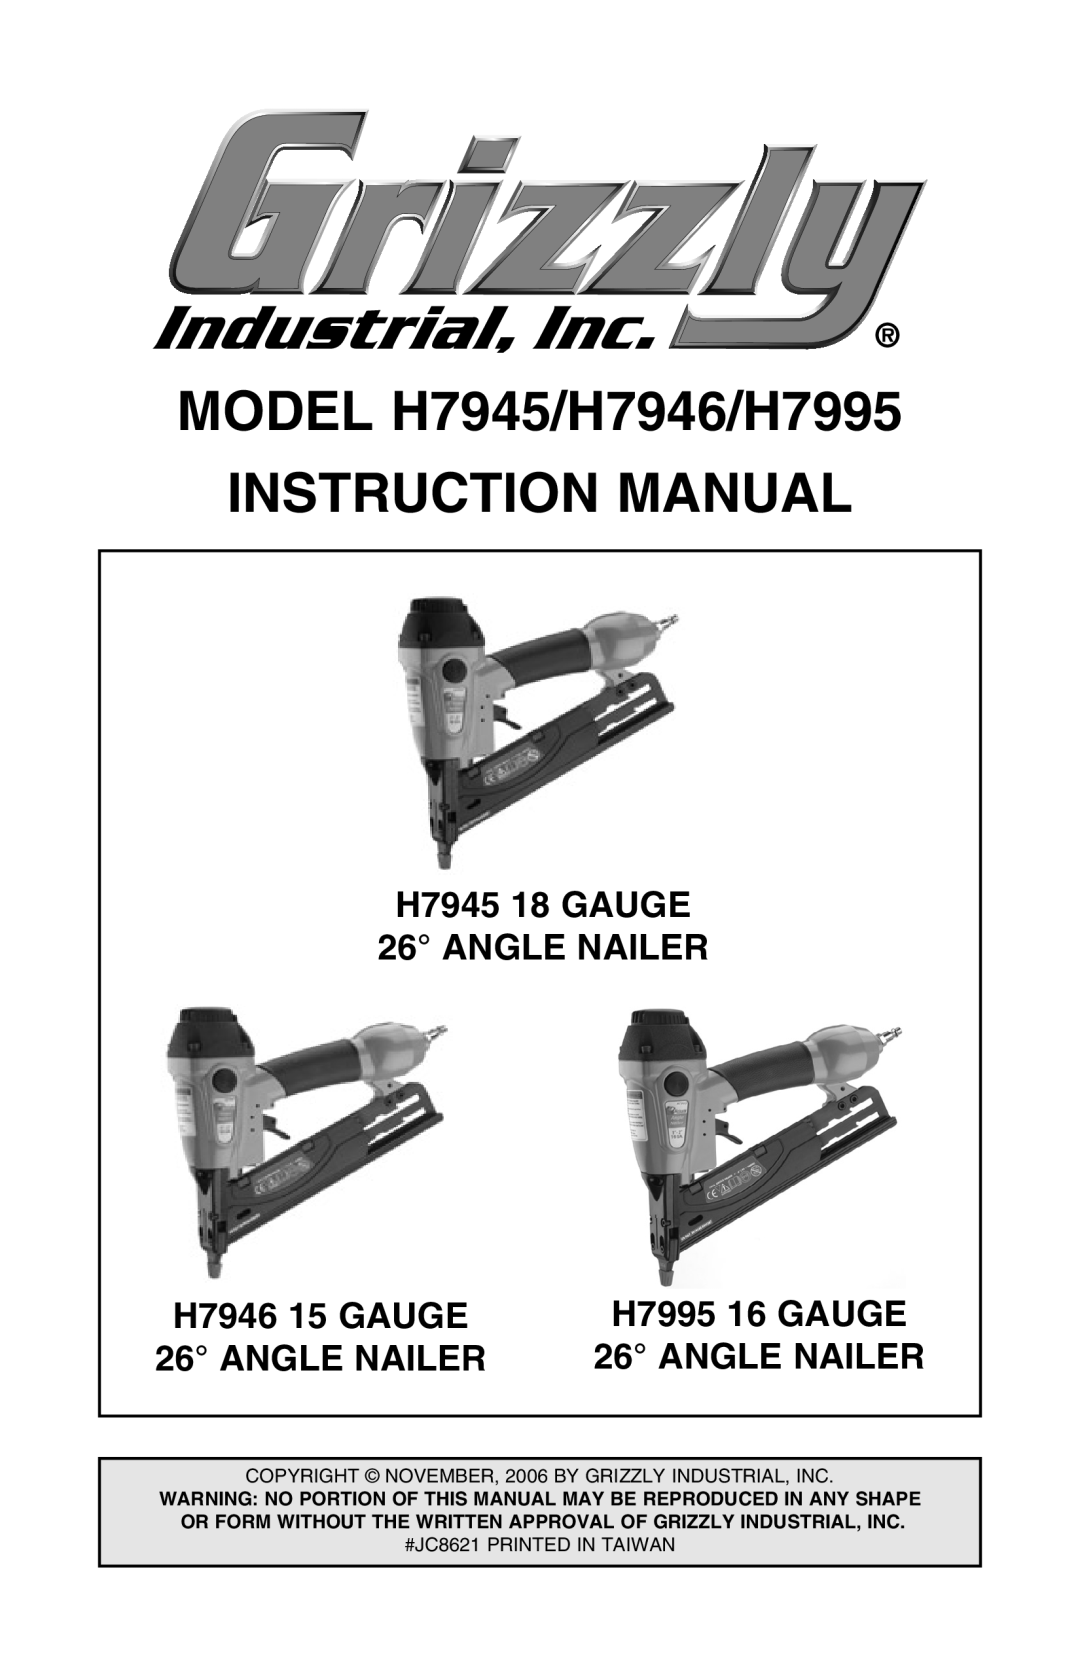 Grizzly instruction manual H7945 18 GAUGE 26 ANGLE NAILER, H7946 15 GAUGE, H7995 16 GAUGE, Angle Nailer 